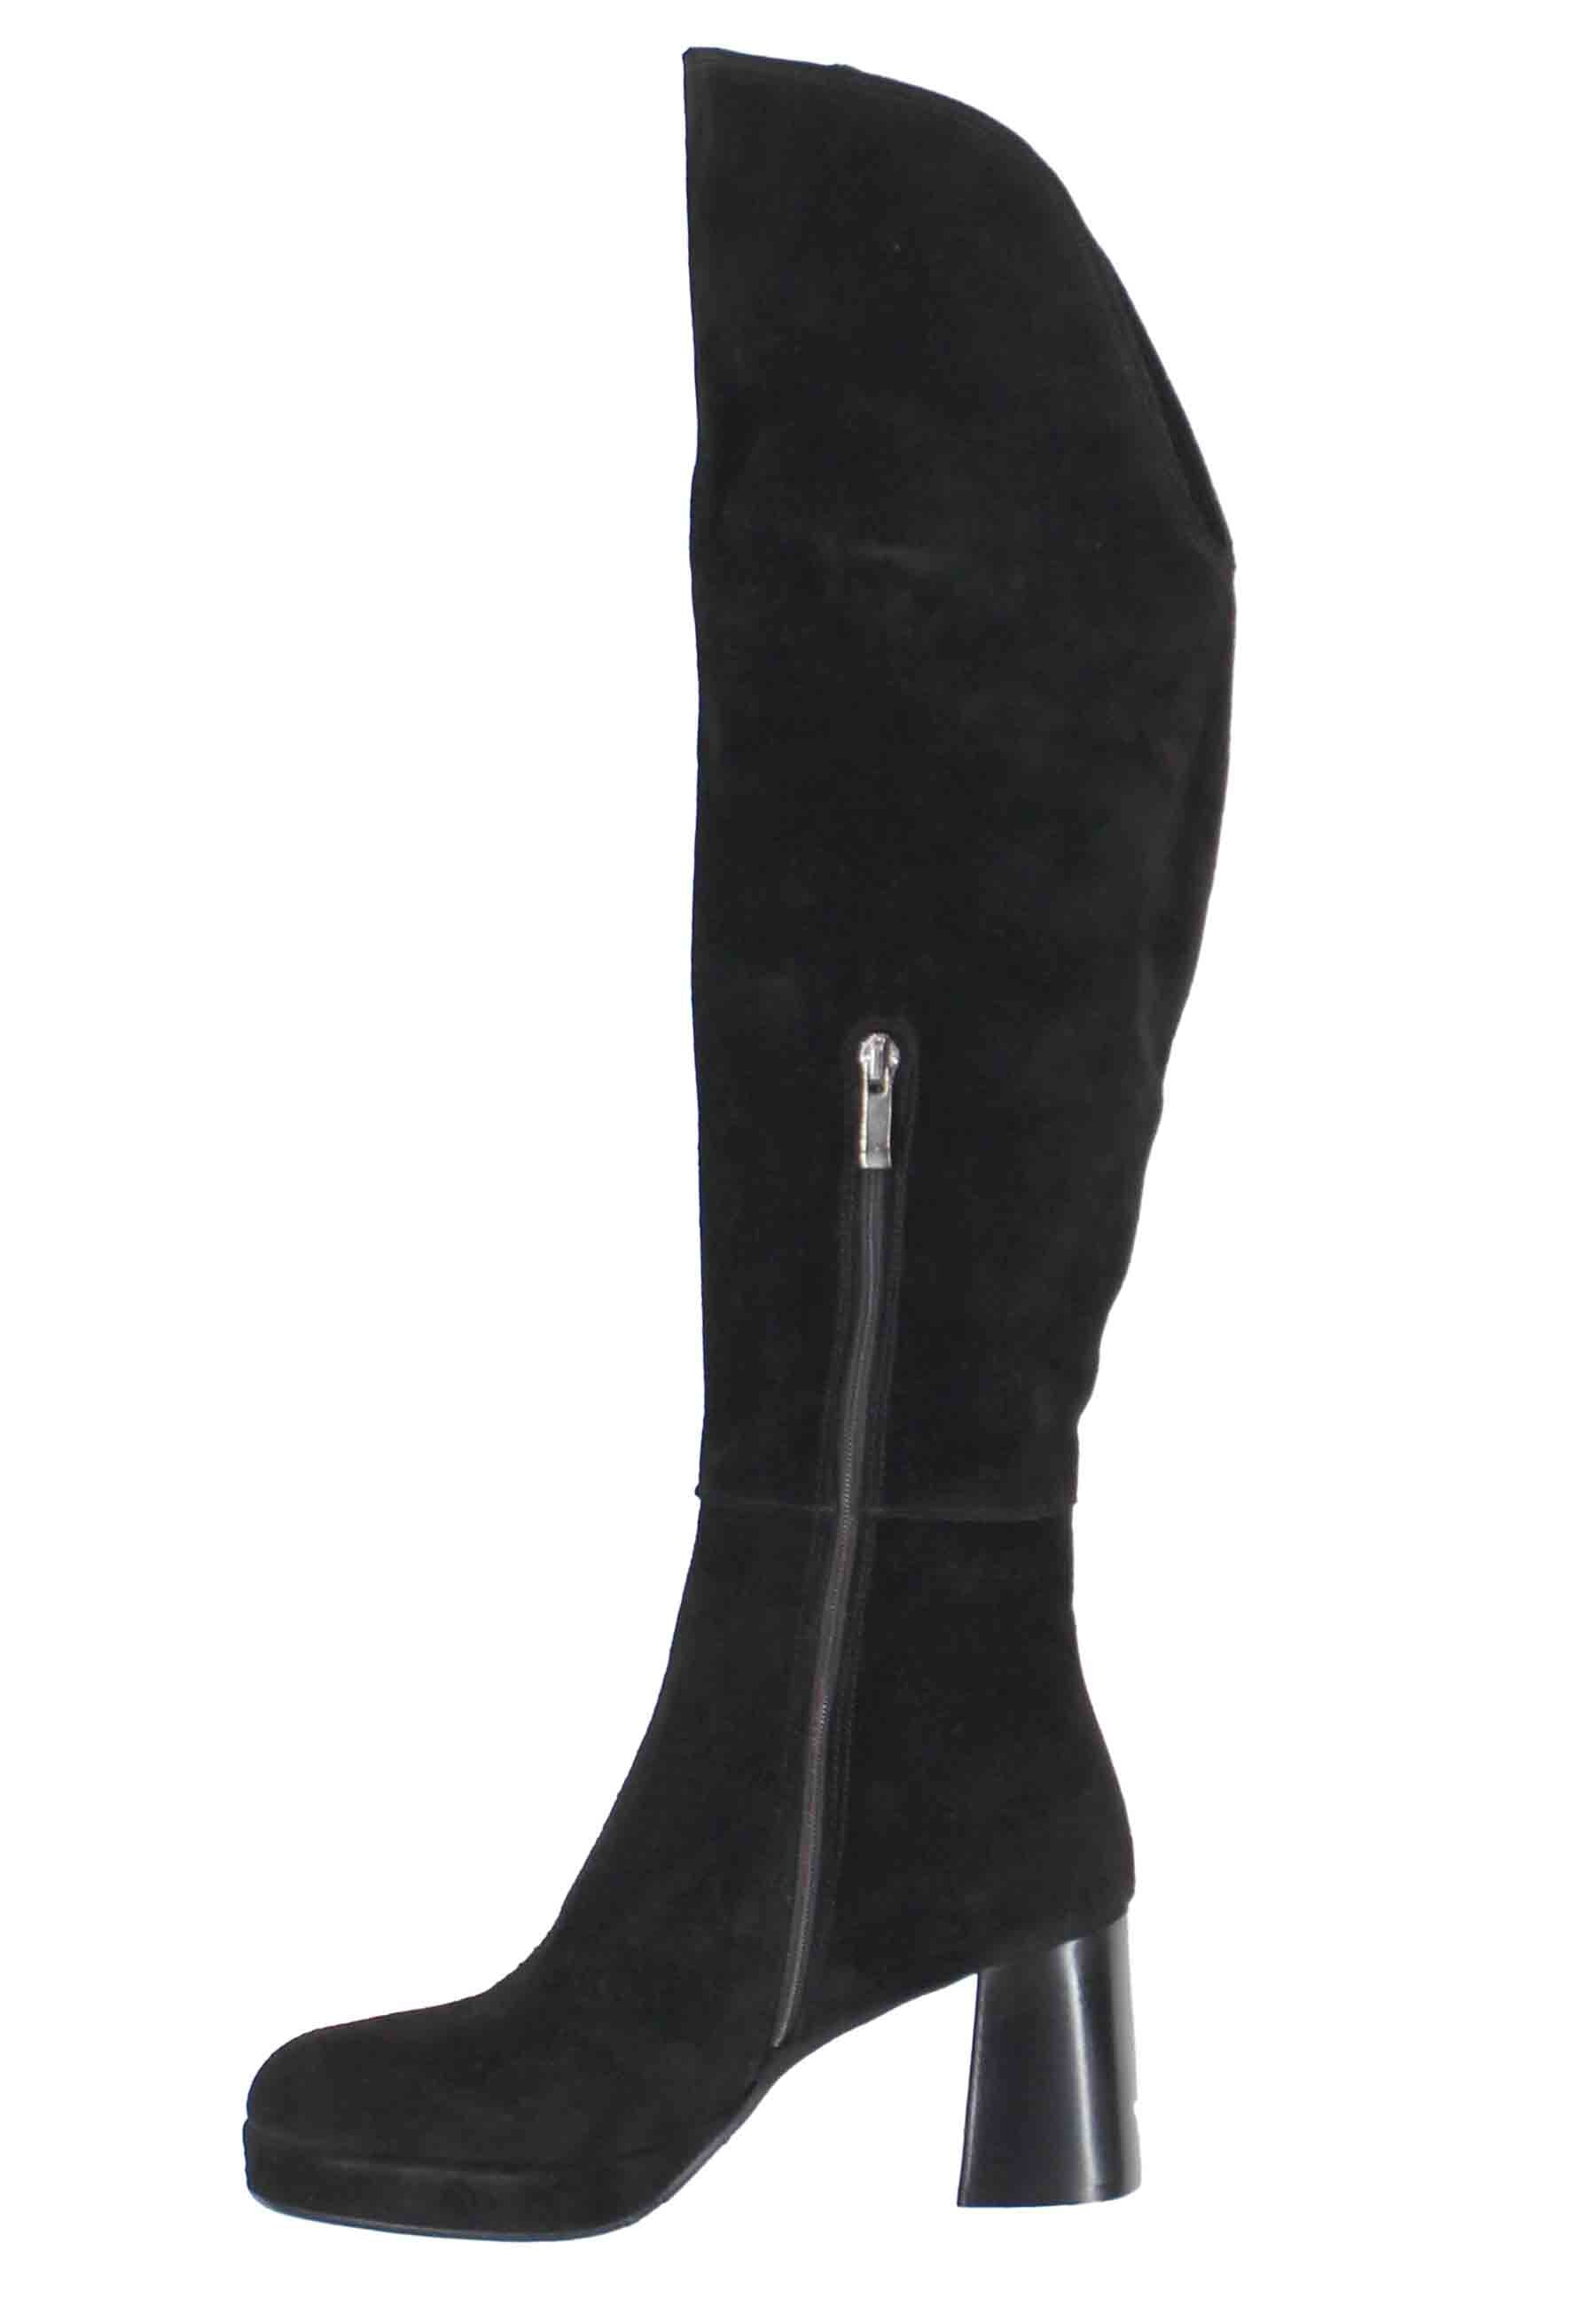 Women's black suede boots with gaiter and high heel